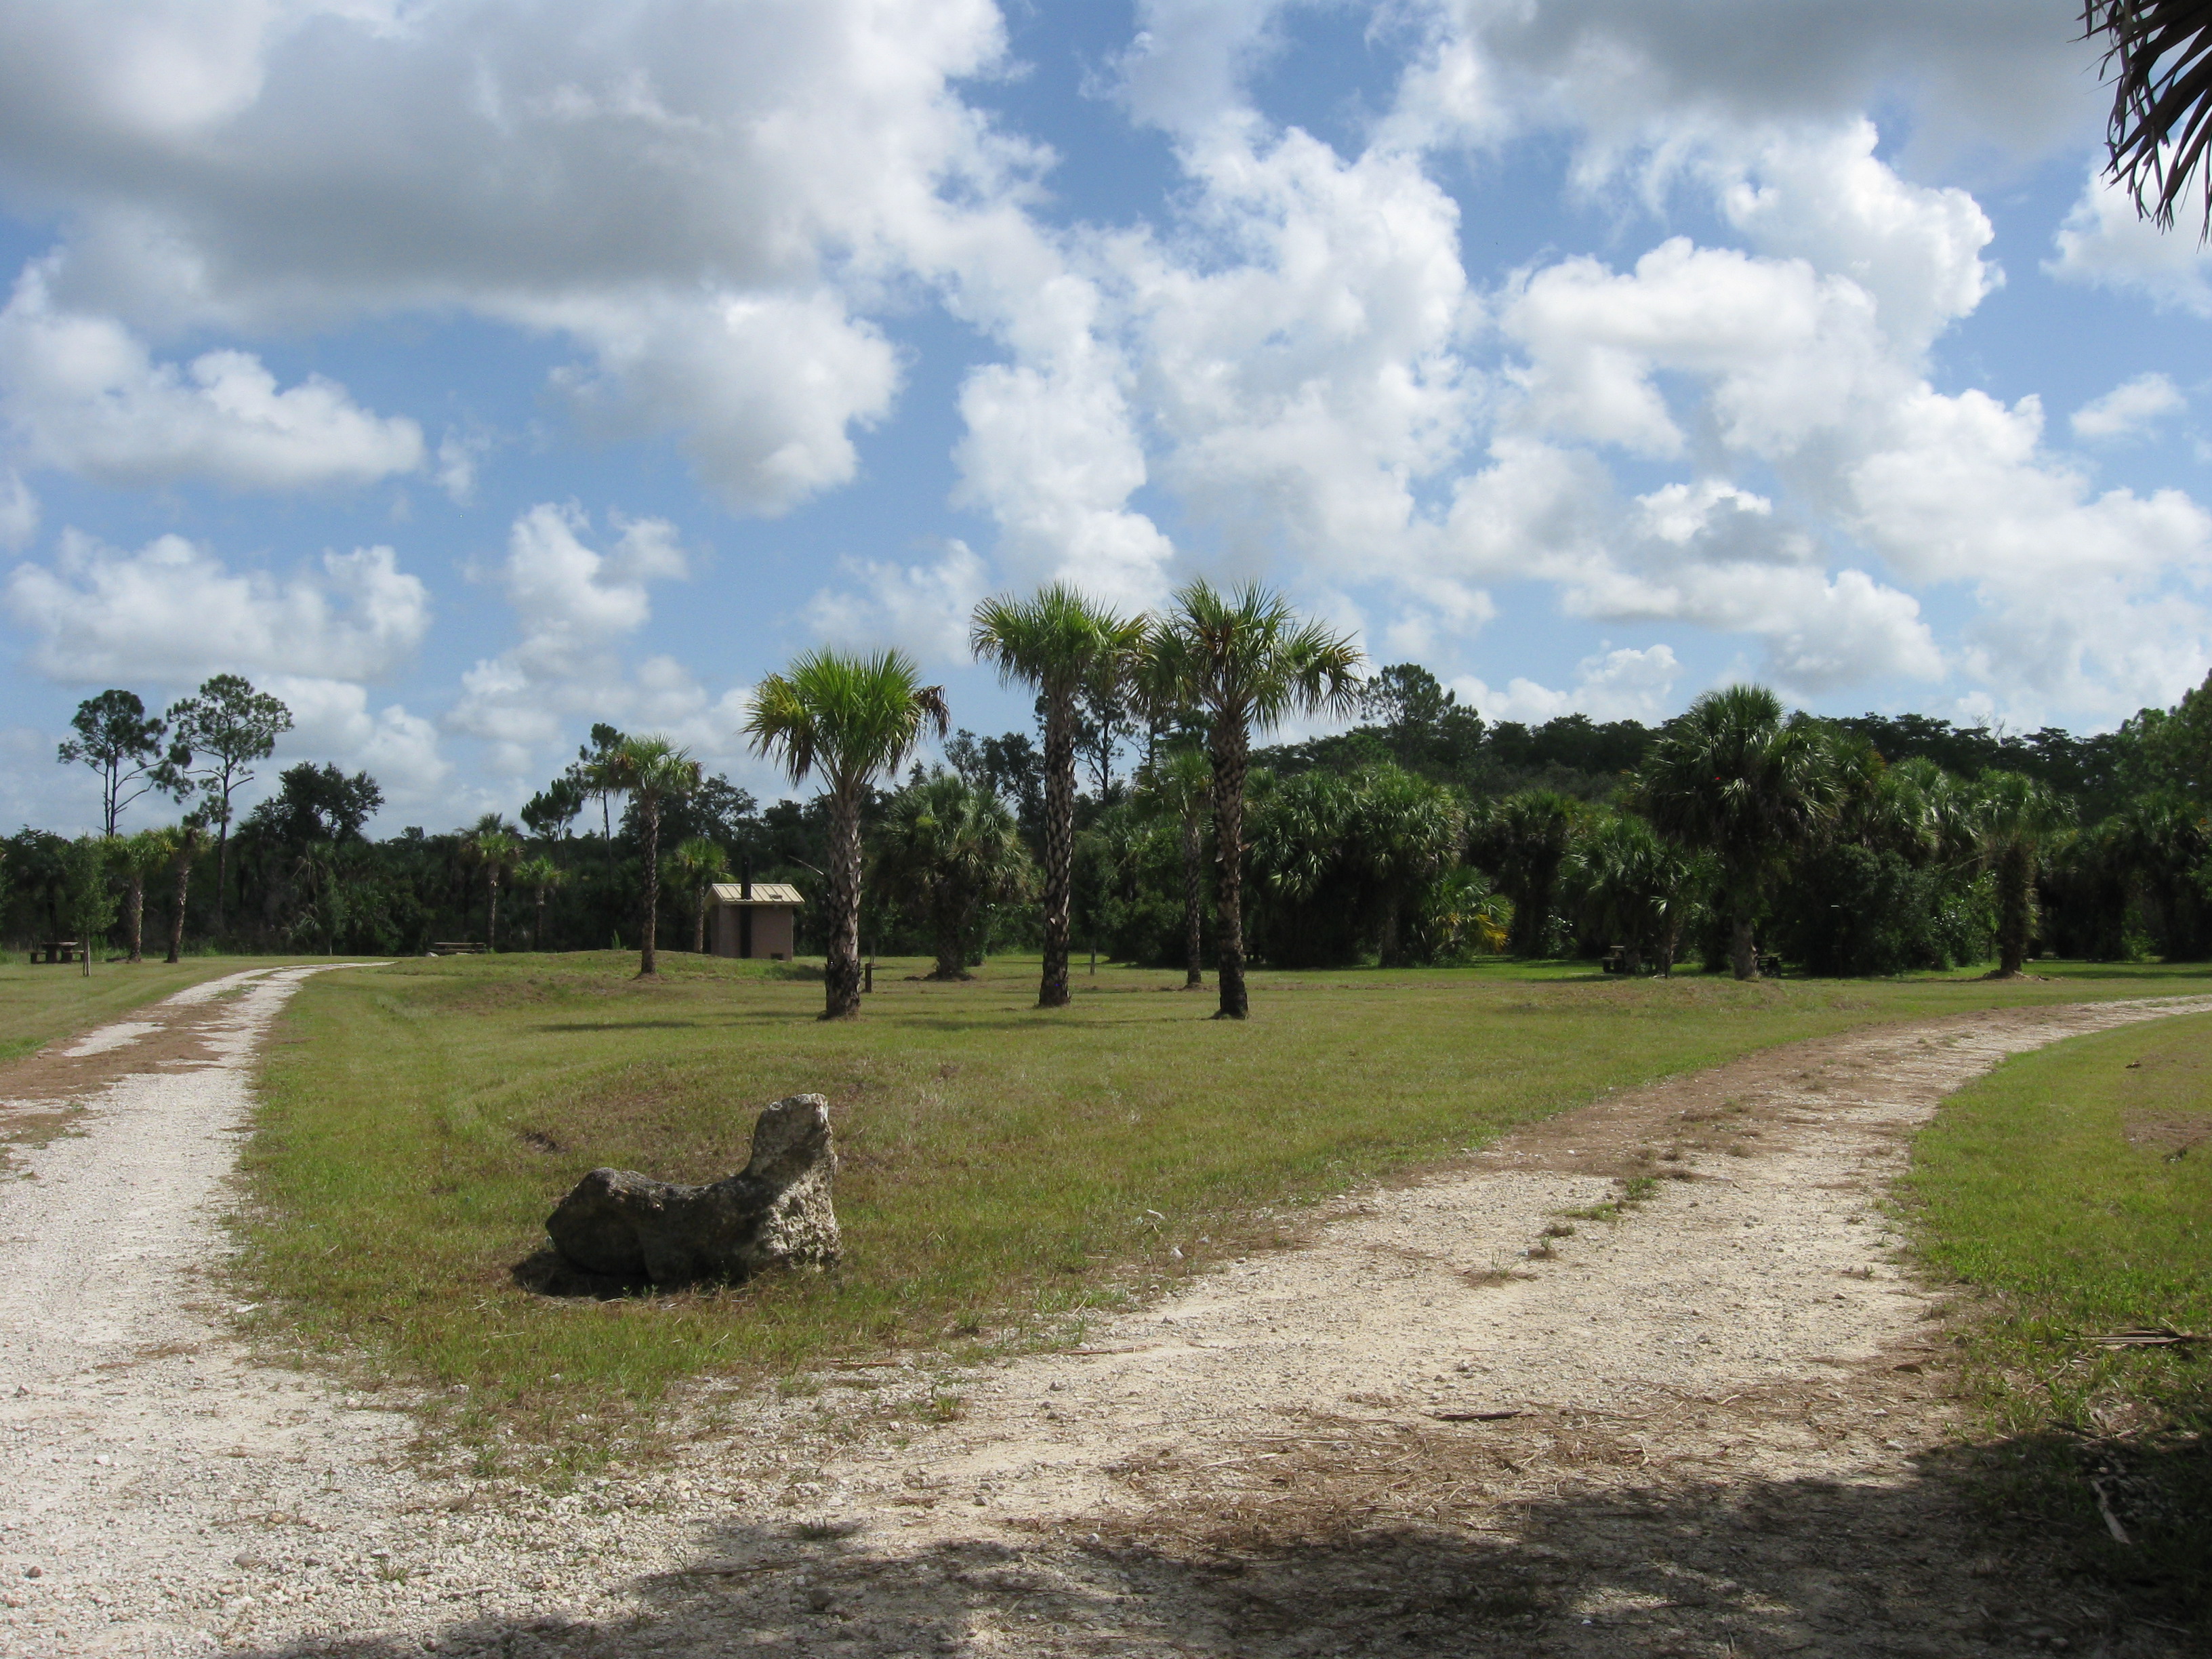 two dirt paths diverge with palm trees in the background